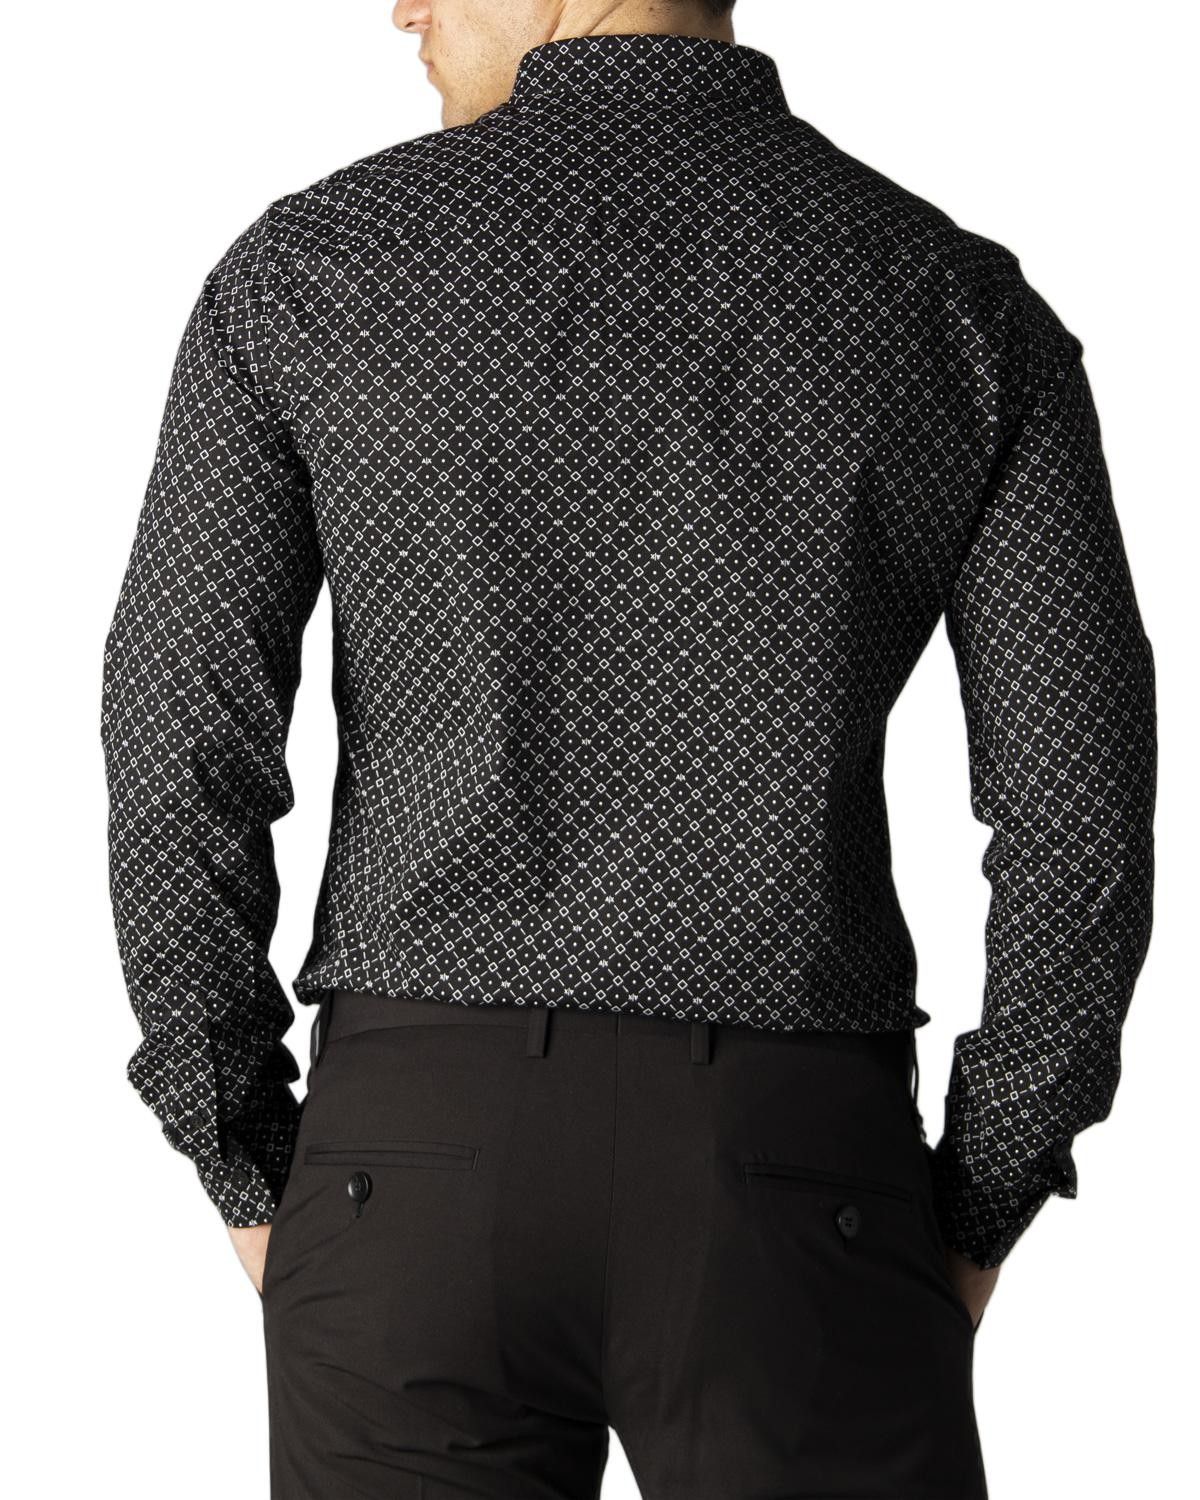 Brand: Armani Exchange
Gender: Men
Type: Shirts
Season: Spring/Summer

PRODUCT DETAIL
• Color: black
• Pattern: print
• Fastening: buttons
• Sleeves: long
• Collar: classic

COMPOSITION AND MATERIAL
• Composition: -97% cotton -3% elastane 
•  Washing: machine wash at 30°